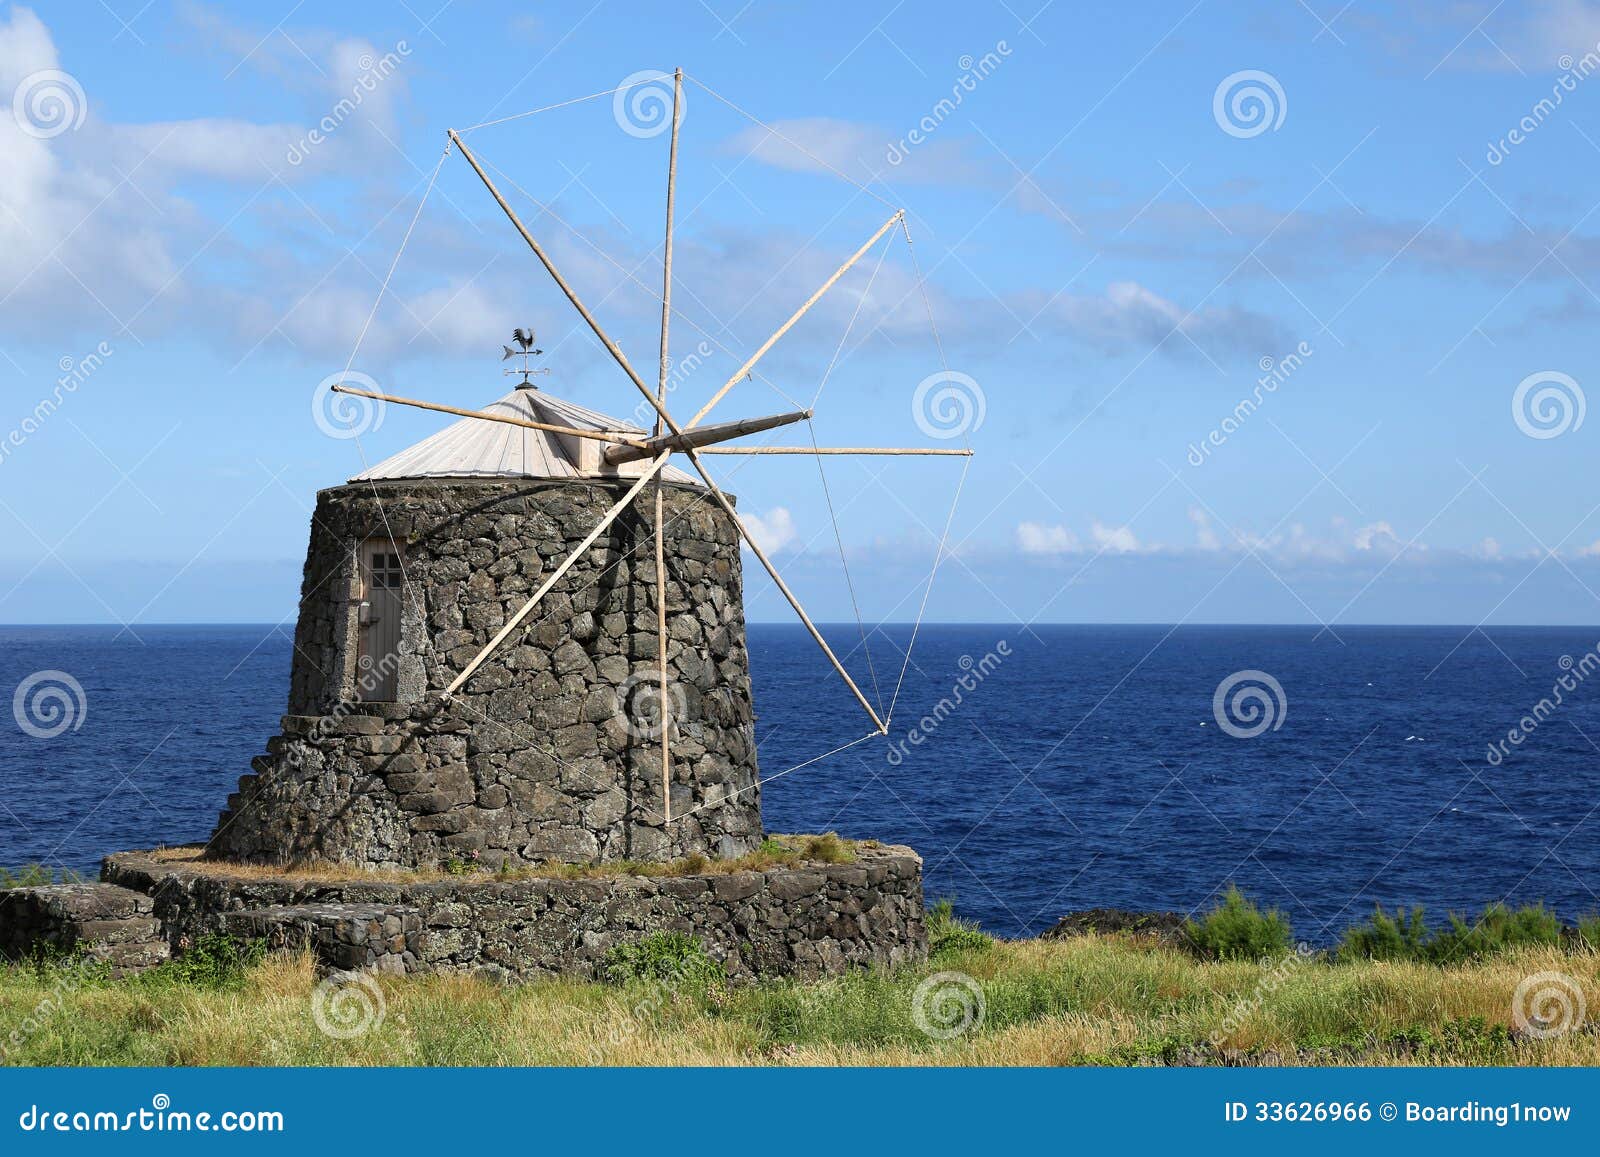 old windmill on the island of corvo azores